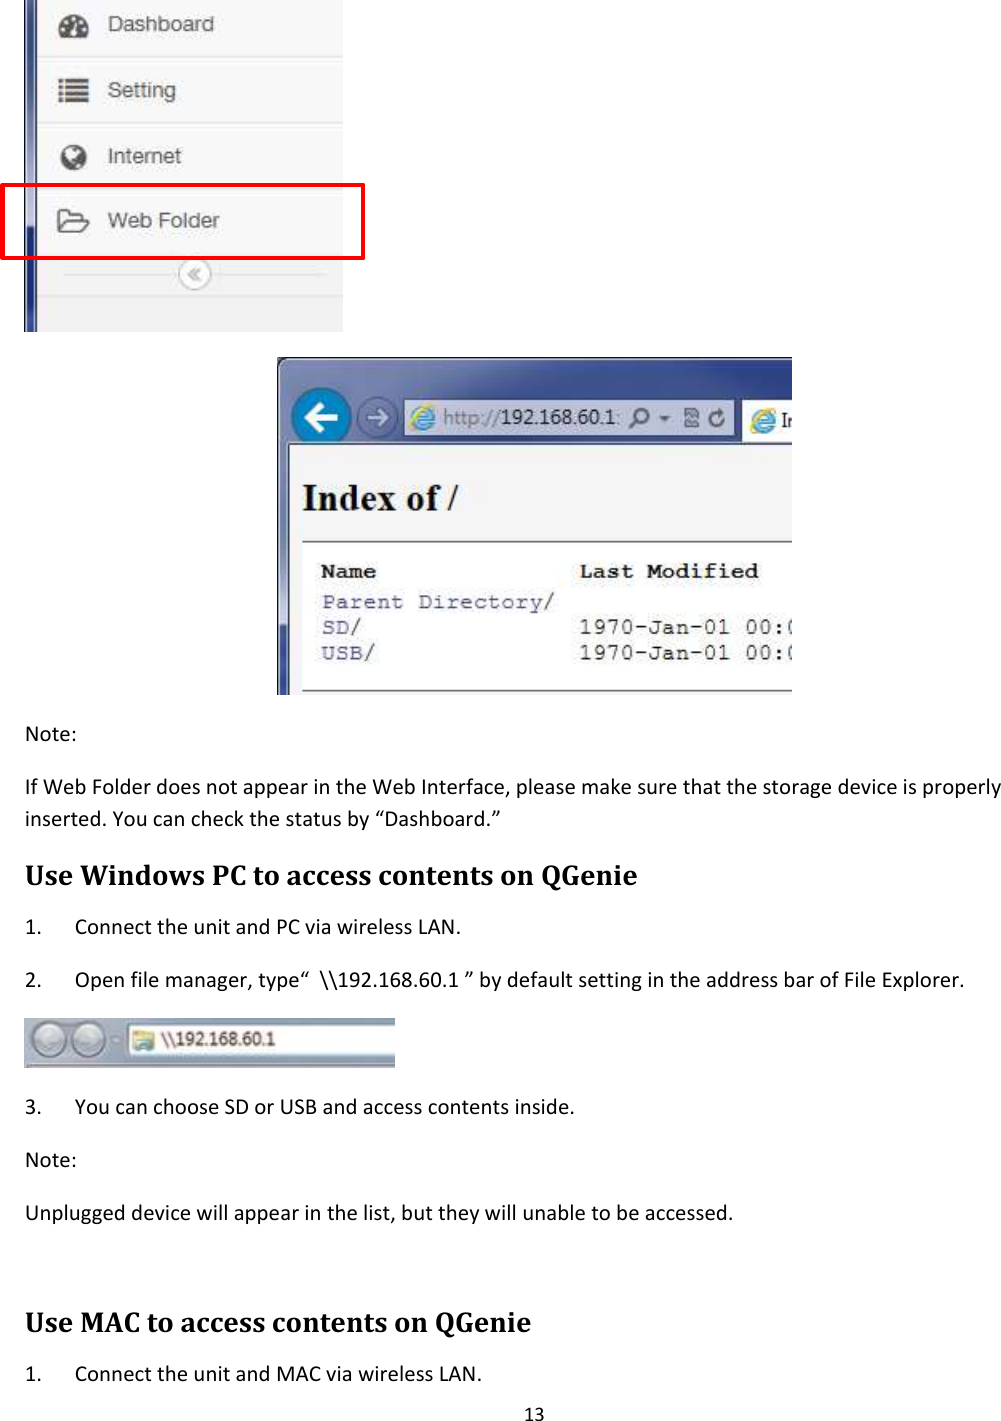 13    Note: If Web Folder does not appear in the Web Interface, please make sure that the storage device is properly inserted. You can check the status by “Dashboard.” Use Windows PC to access contents on QGenie 1. Connect the unit and PC via wireless LAN. 2. Open file manager, type“  \\192.168.60.1 ” by default setting in the address bar of File Explorer.  3. You can choose SD or USB and access contents inside. Note: Unplugged device will appear in the list, but they will unable to be accessed.  Use MAC to access contents on QGenie 1. Connect the unit and MAC via wireless LAN. 